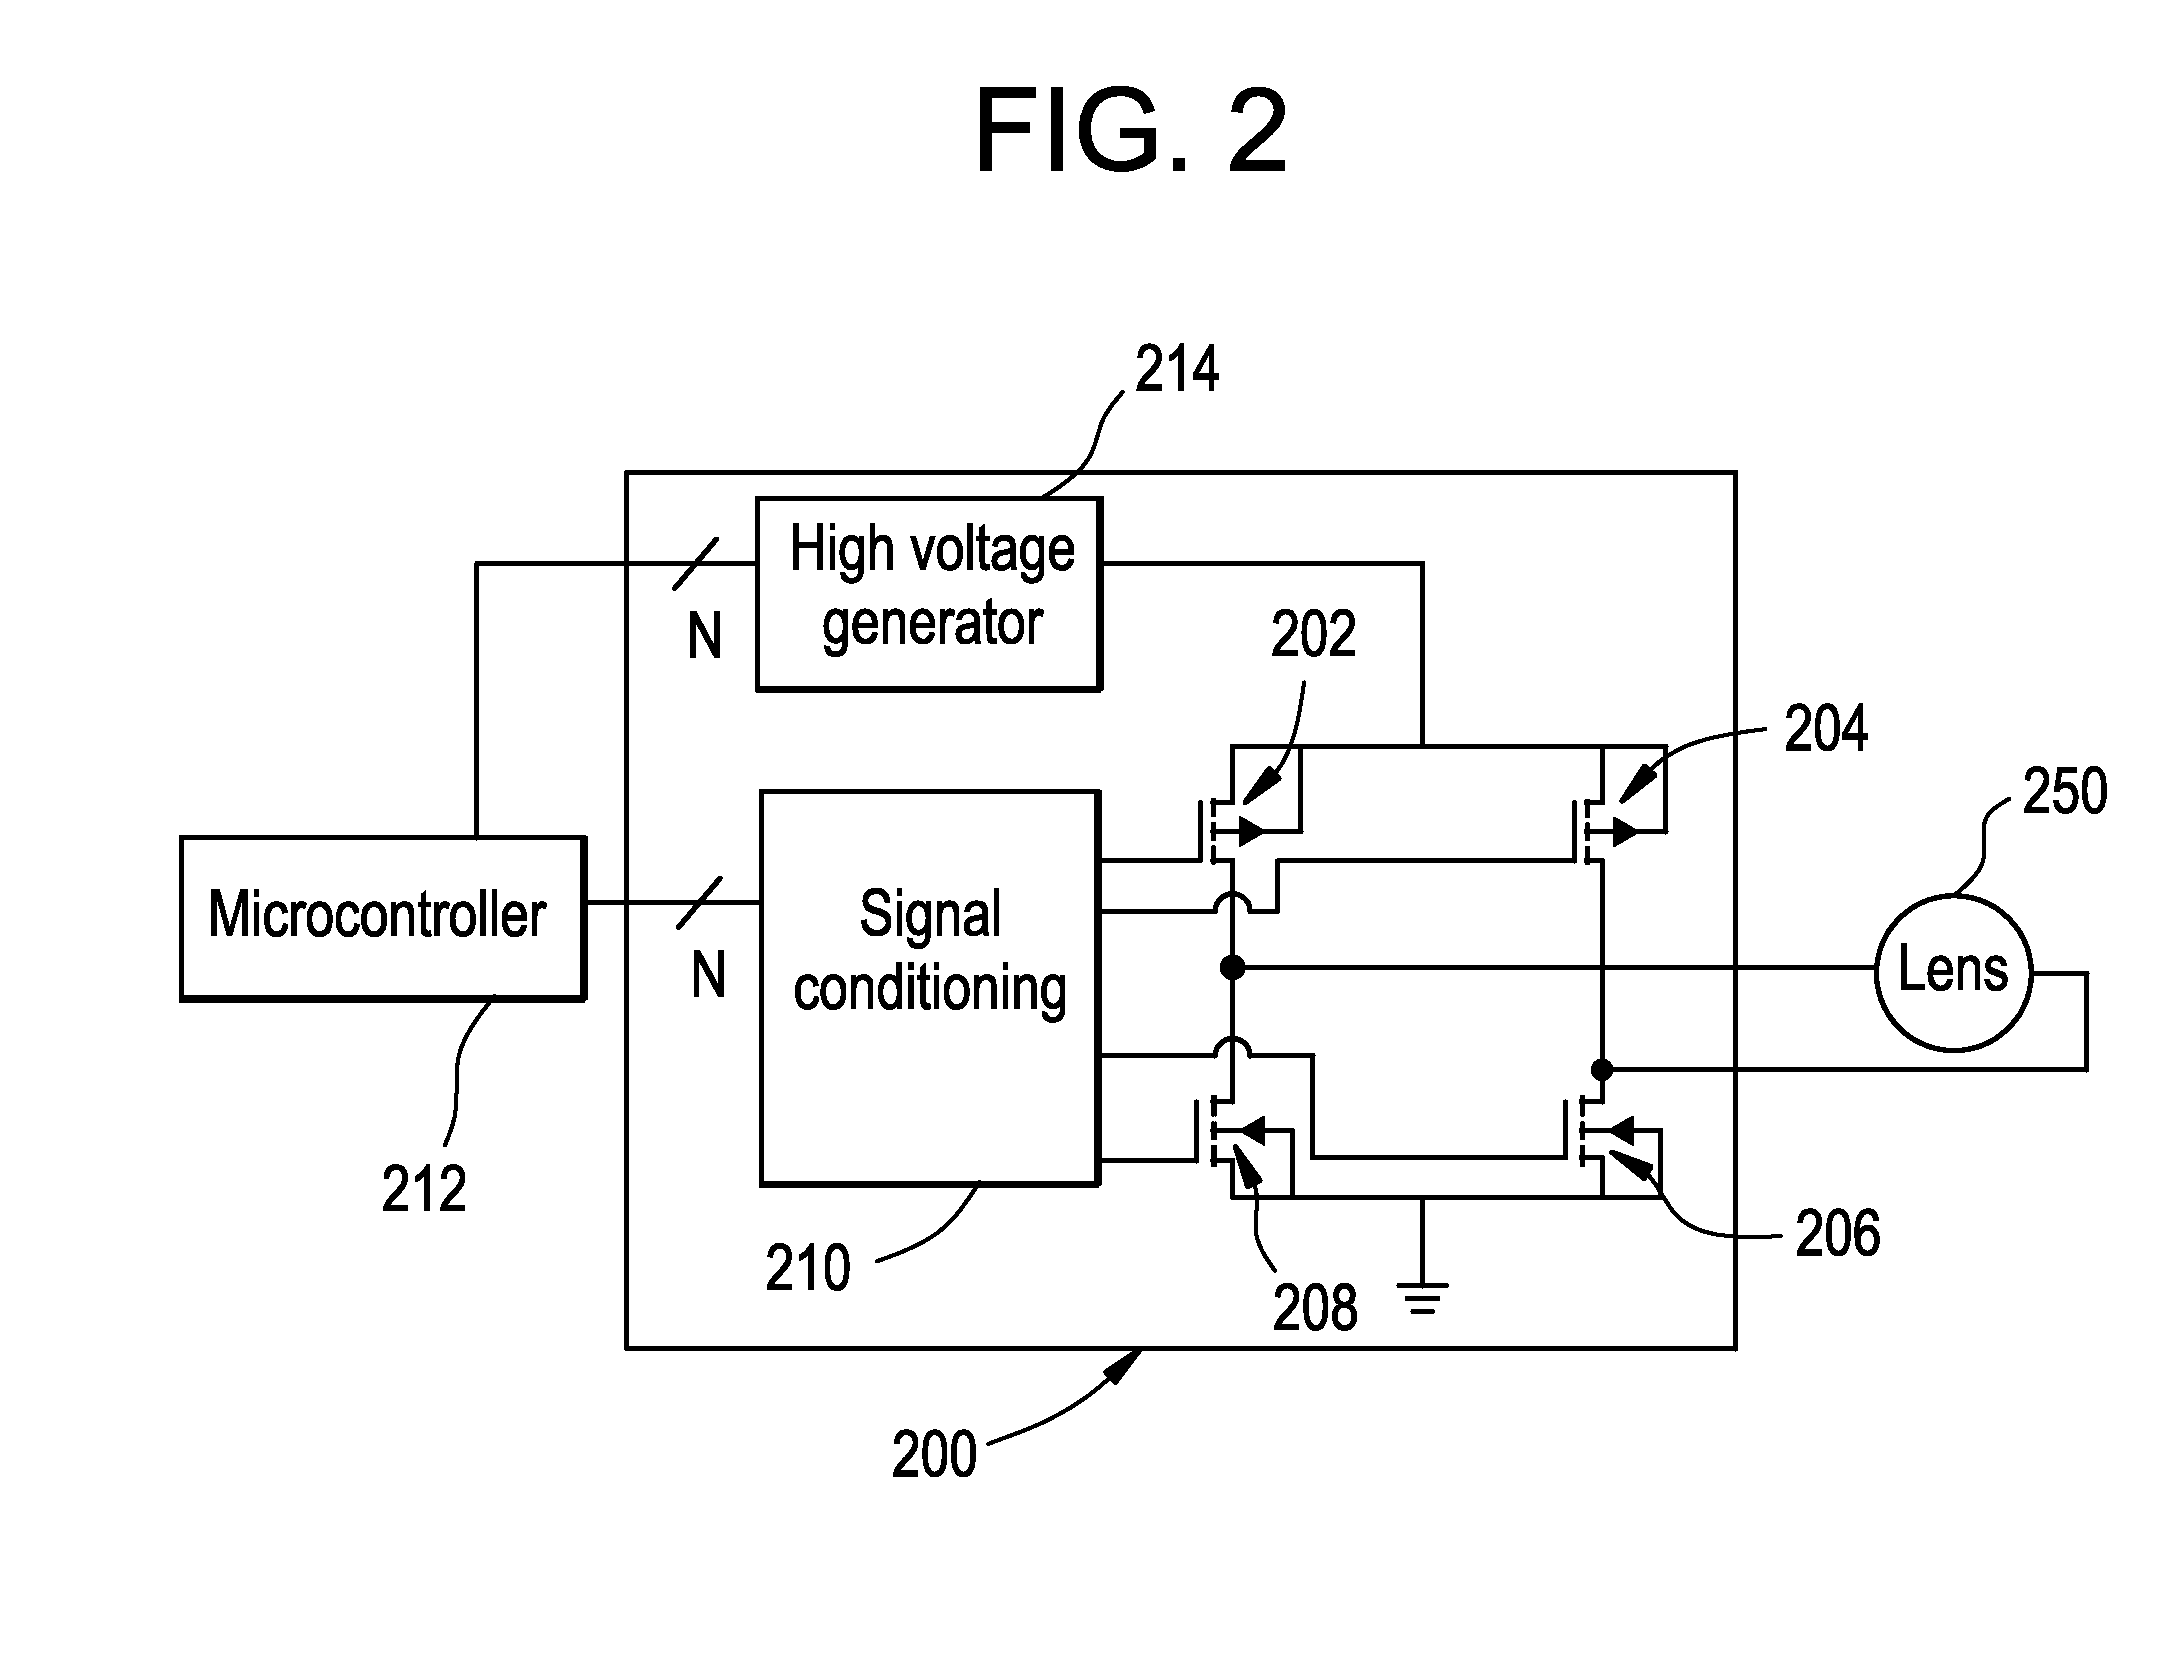 Lens driver for variable-optic electronic ophthalmic lens